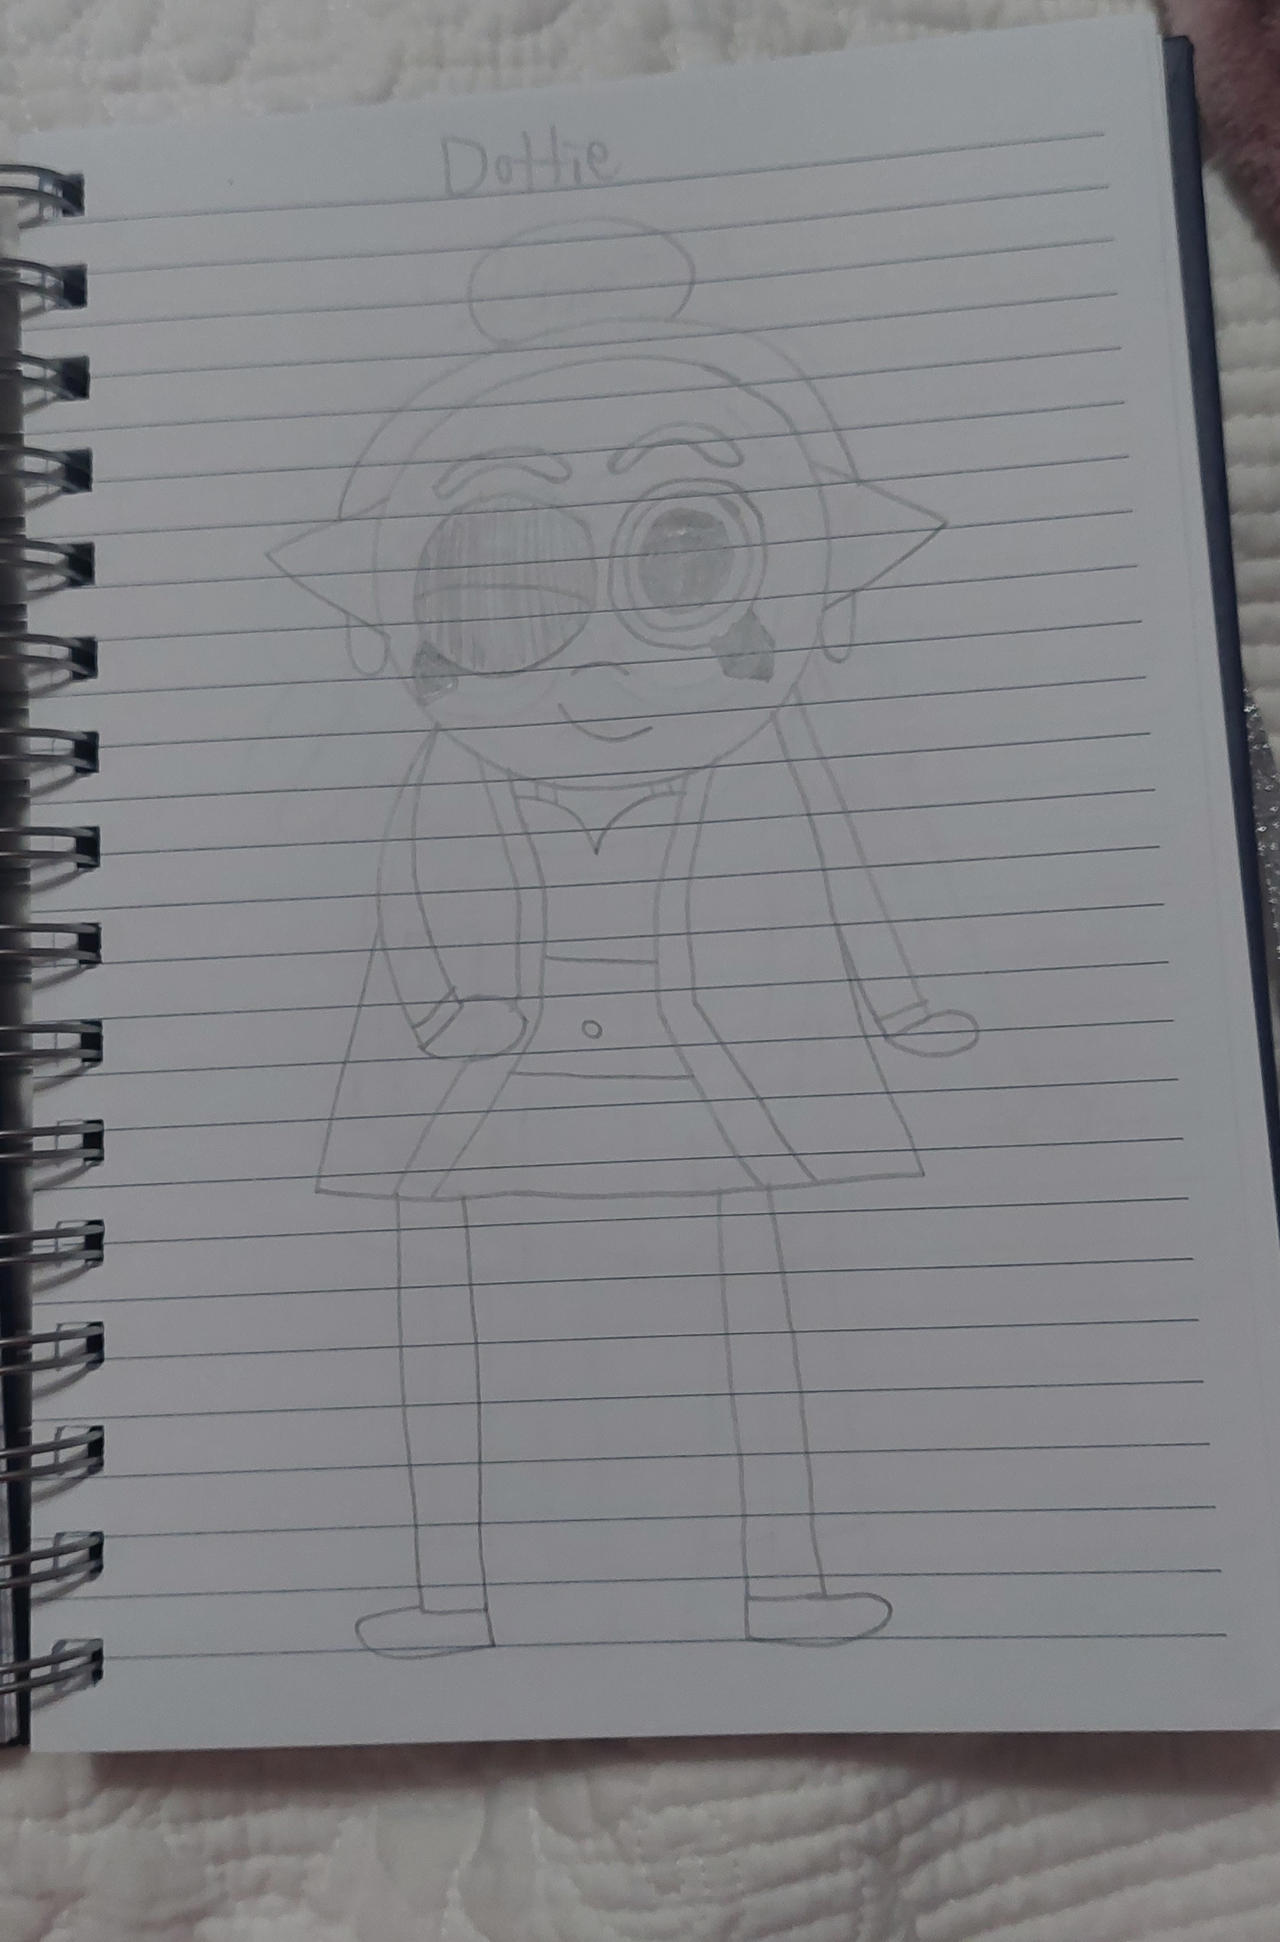 An Update For My Main Character by TKKittycatPN on DeviantArt